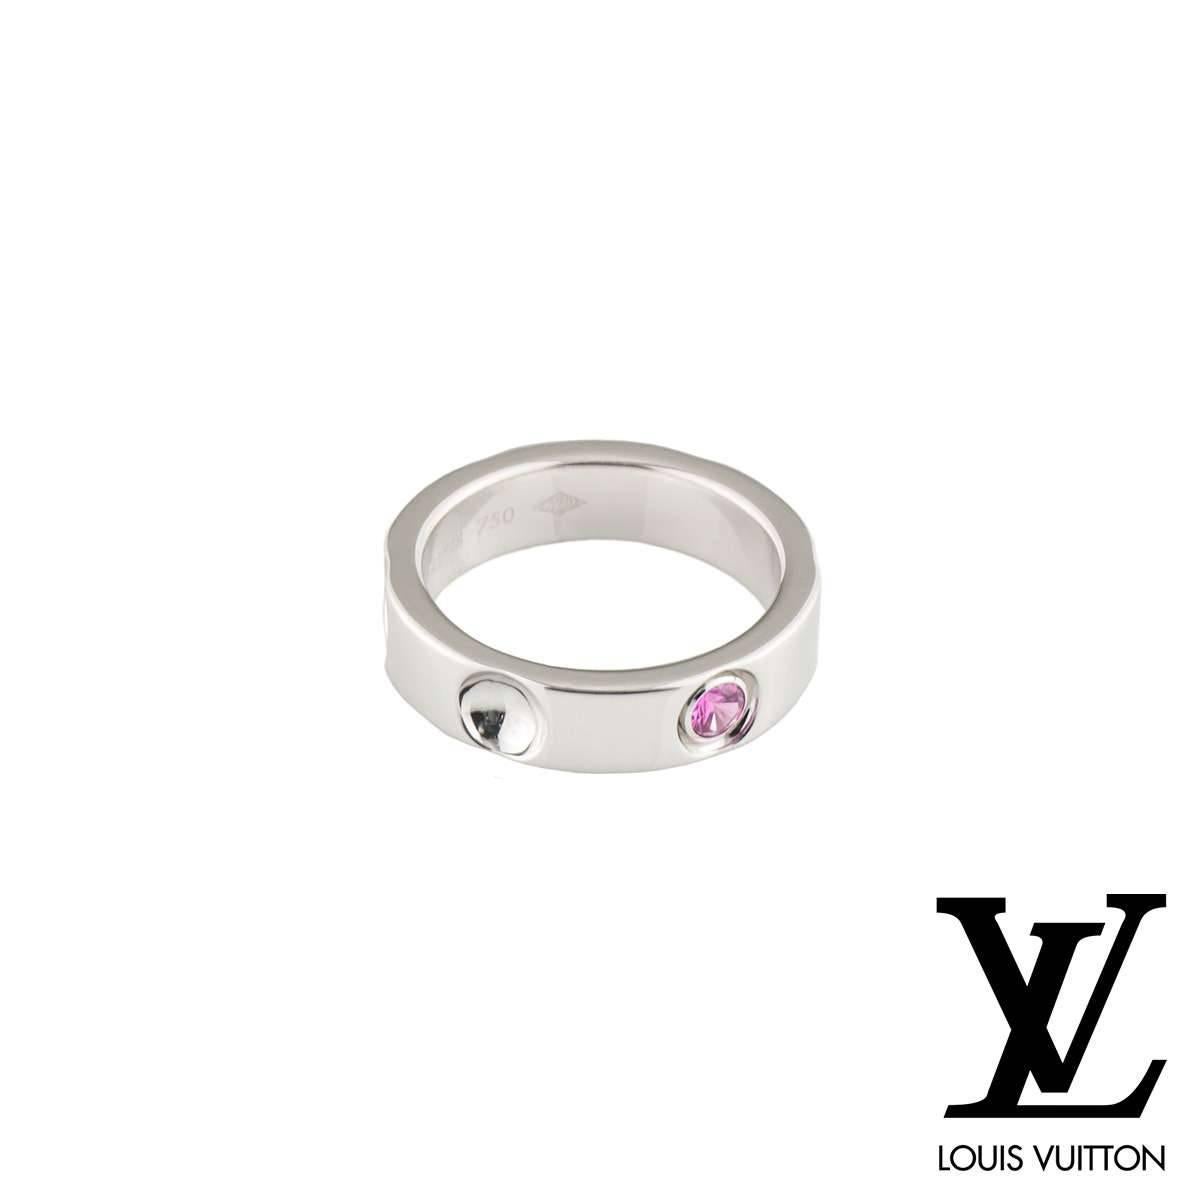 A stunning 18k white gold ring from the Empreinte collection by Louis Vuitton. The ring features 5 inverted stud motifs, one engraved with the Louis Vuitton logo. The ring is set with a single round cut pink sapphire, weighing approximately 0.10ct.